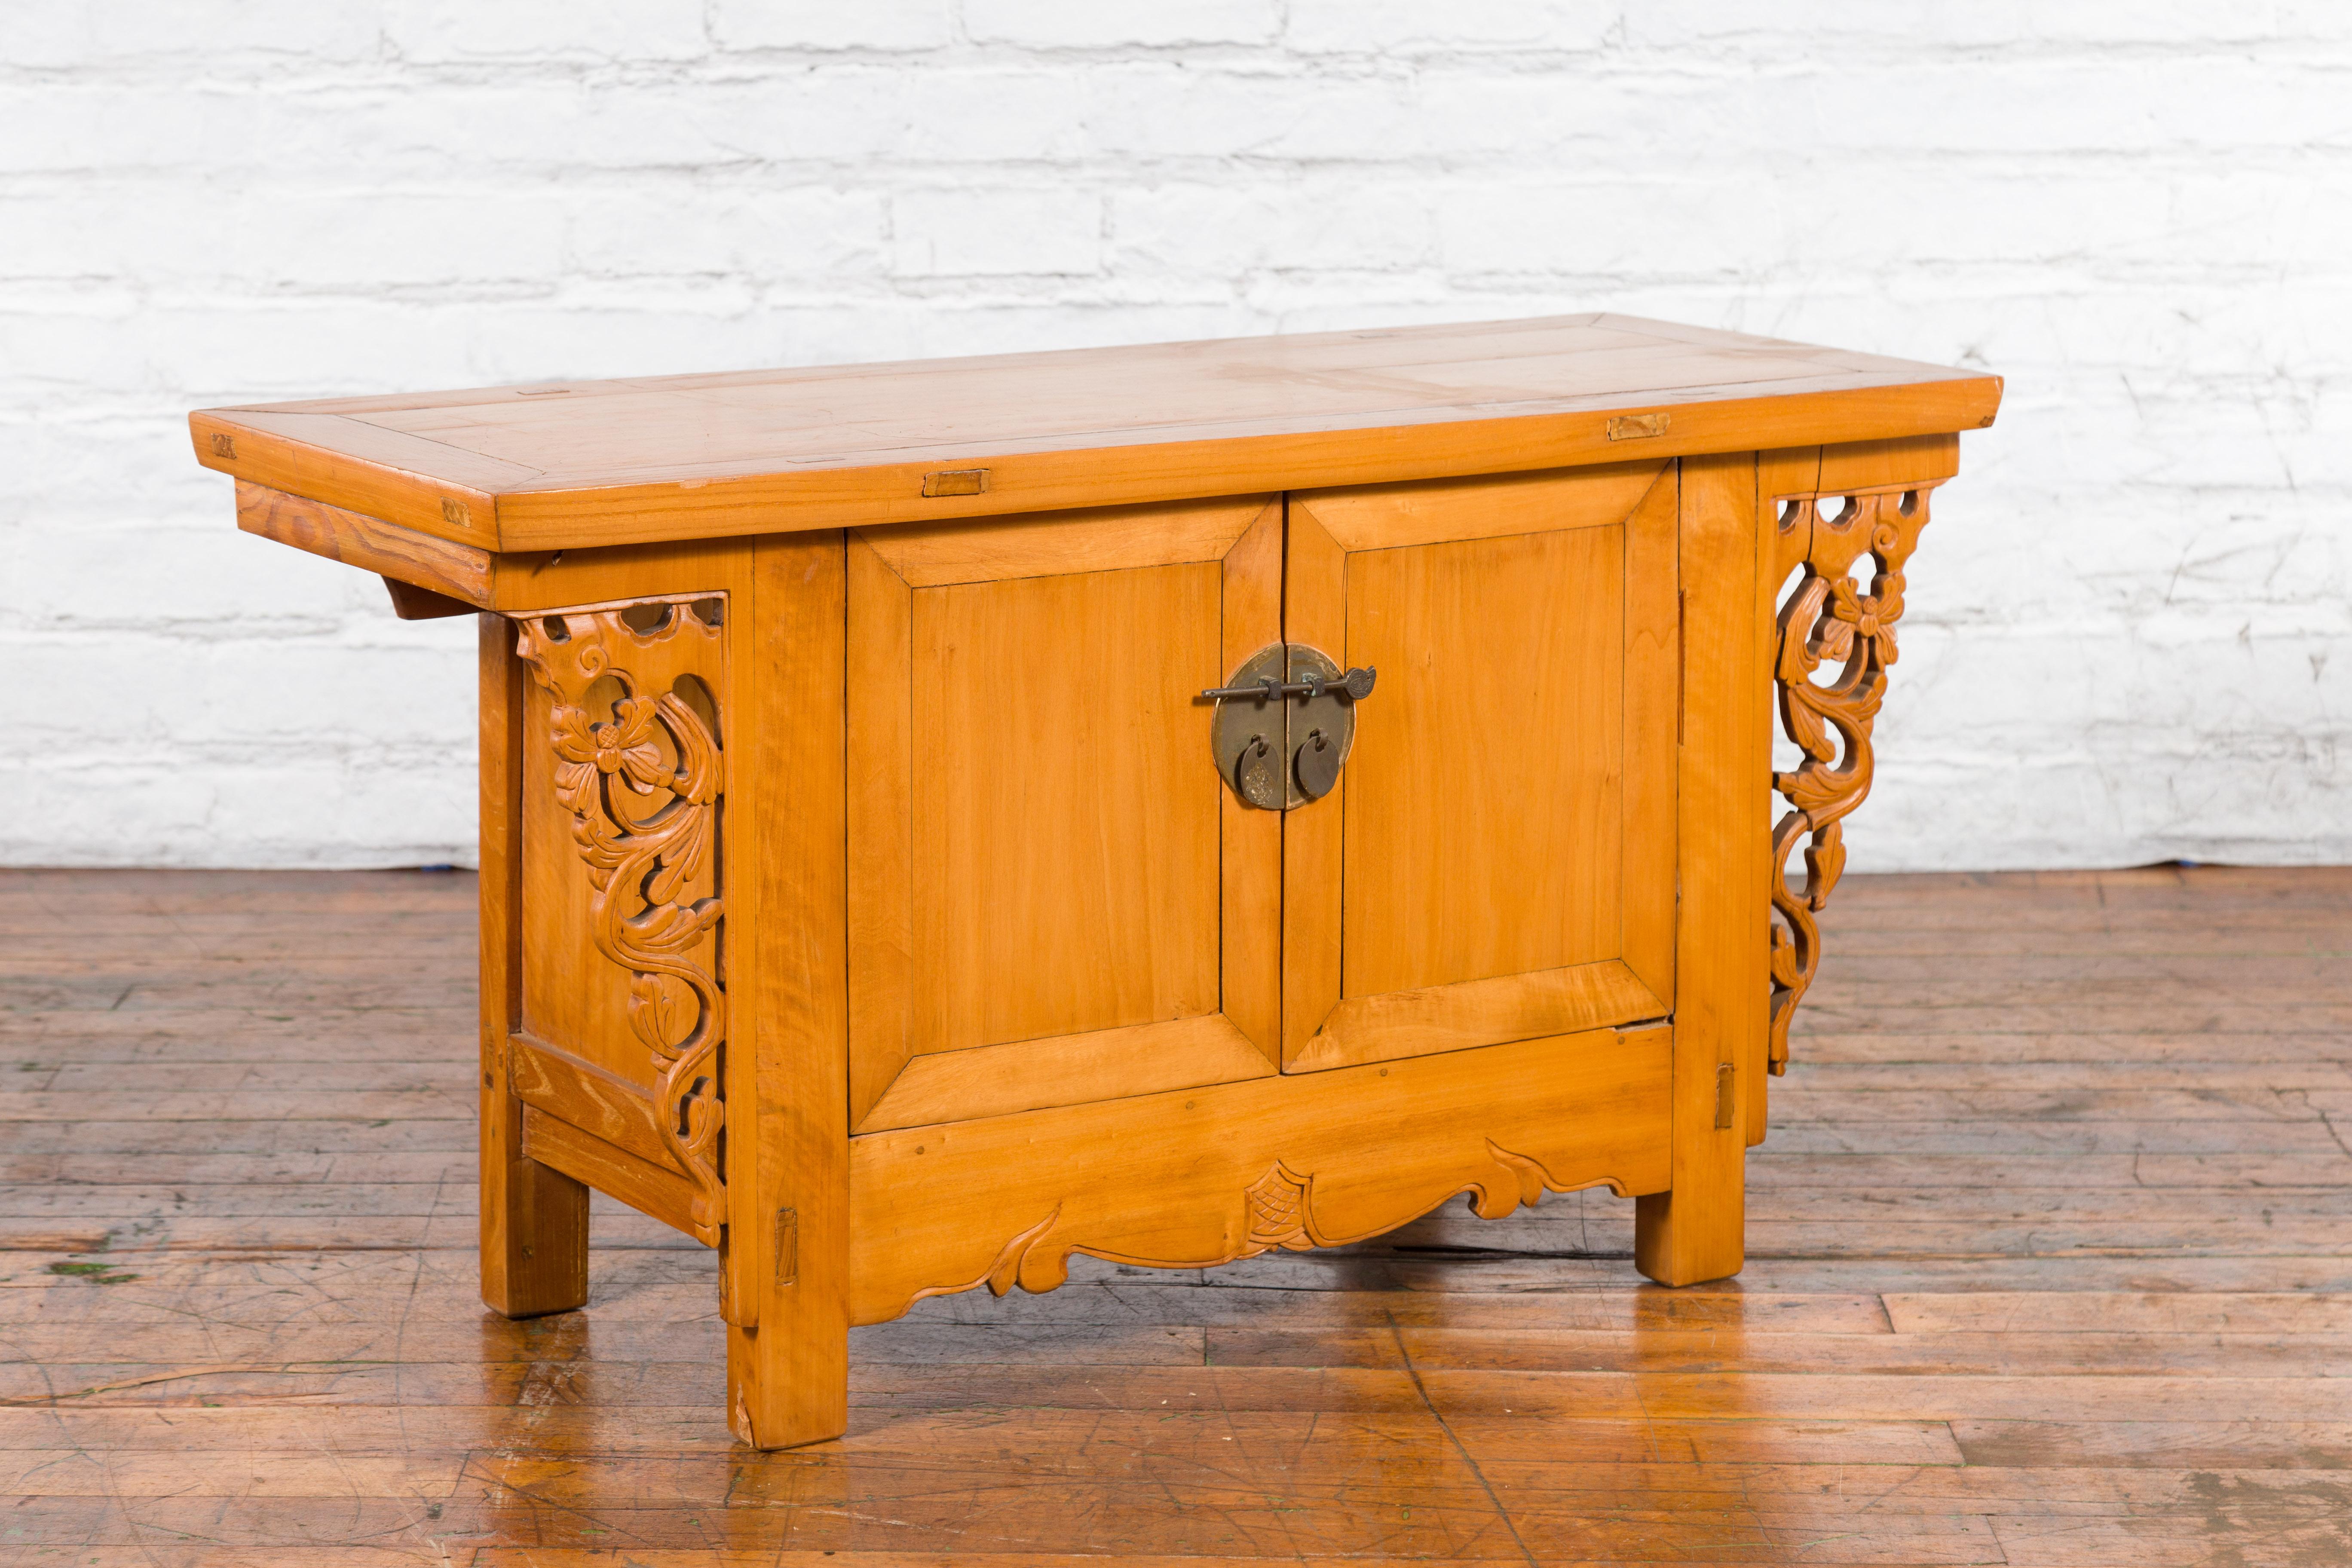 A small Chinese elmwood altar coffer sideboard from the early 20th century, with carved spandrels and brass hardware. Created in China during the early years of the 20th century, this elm coffer features a rectangular top with central board, sitting